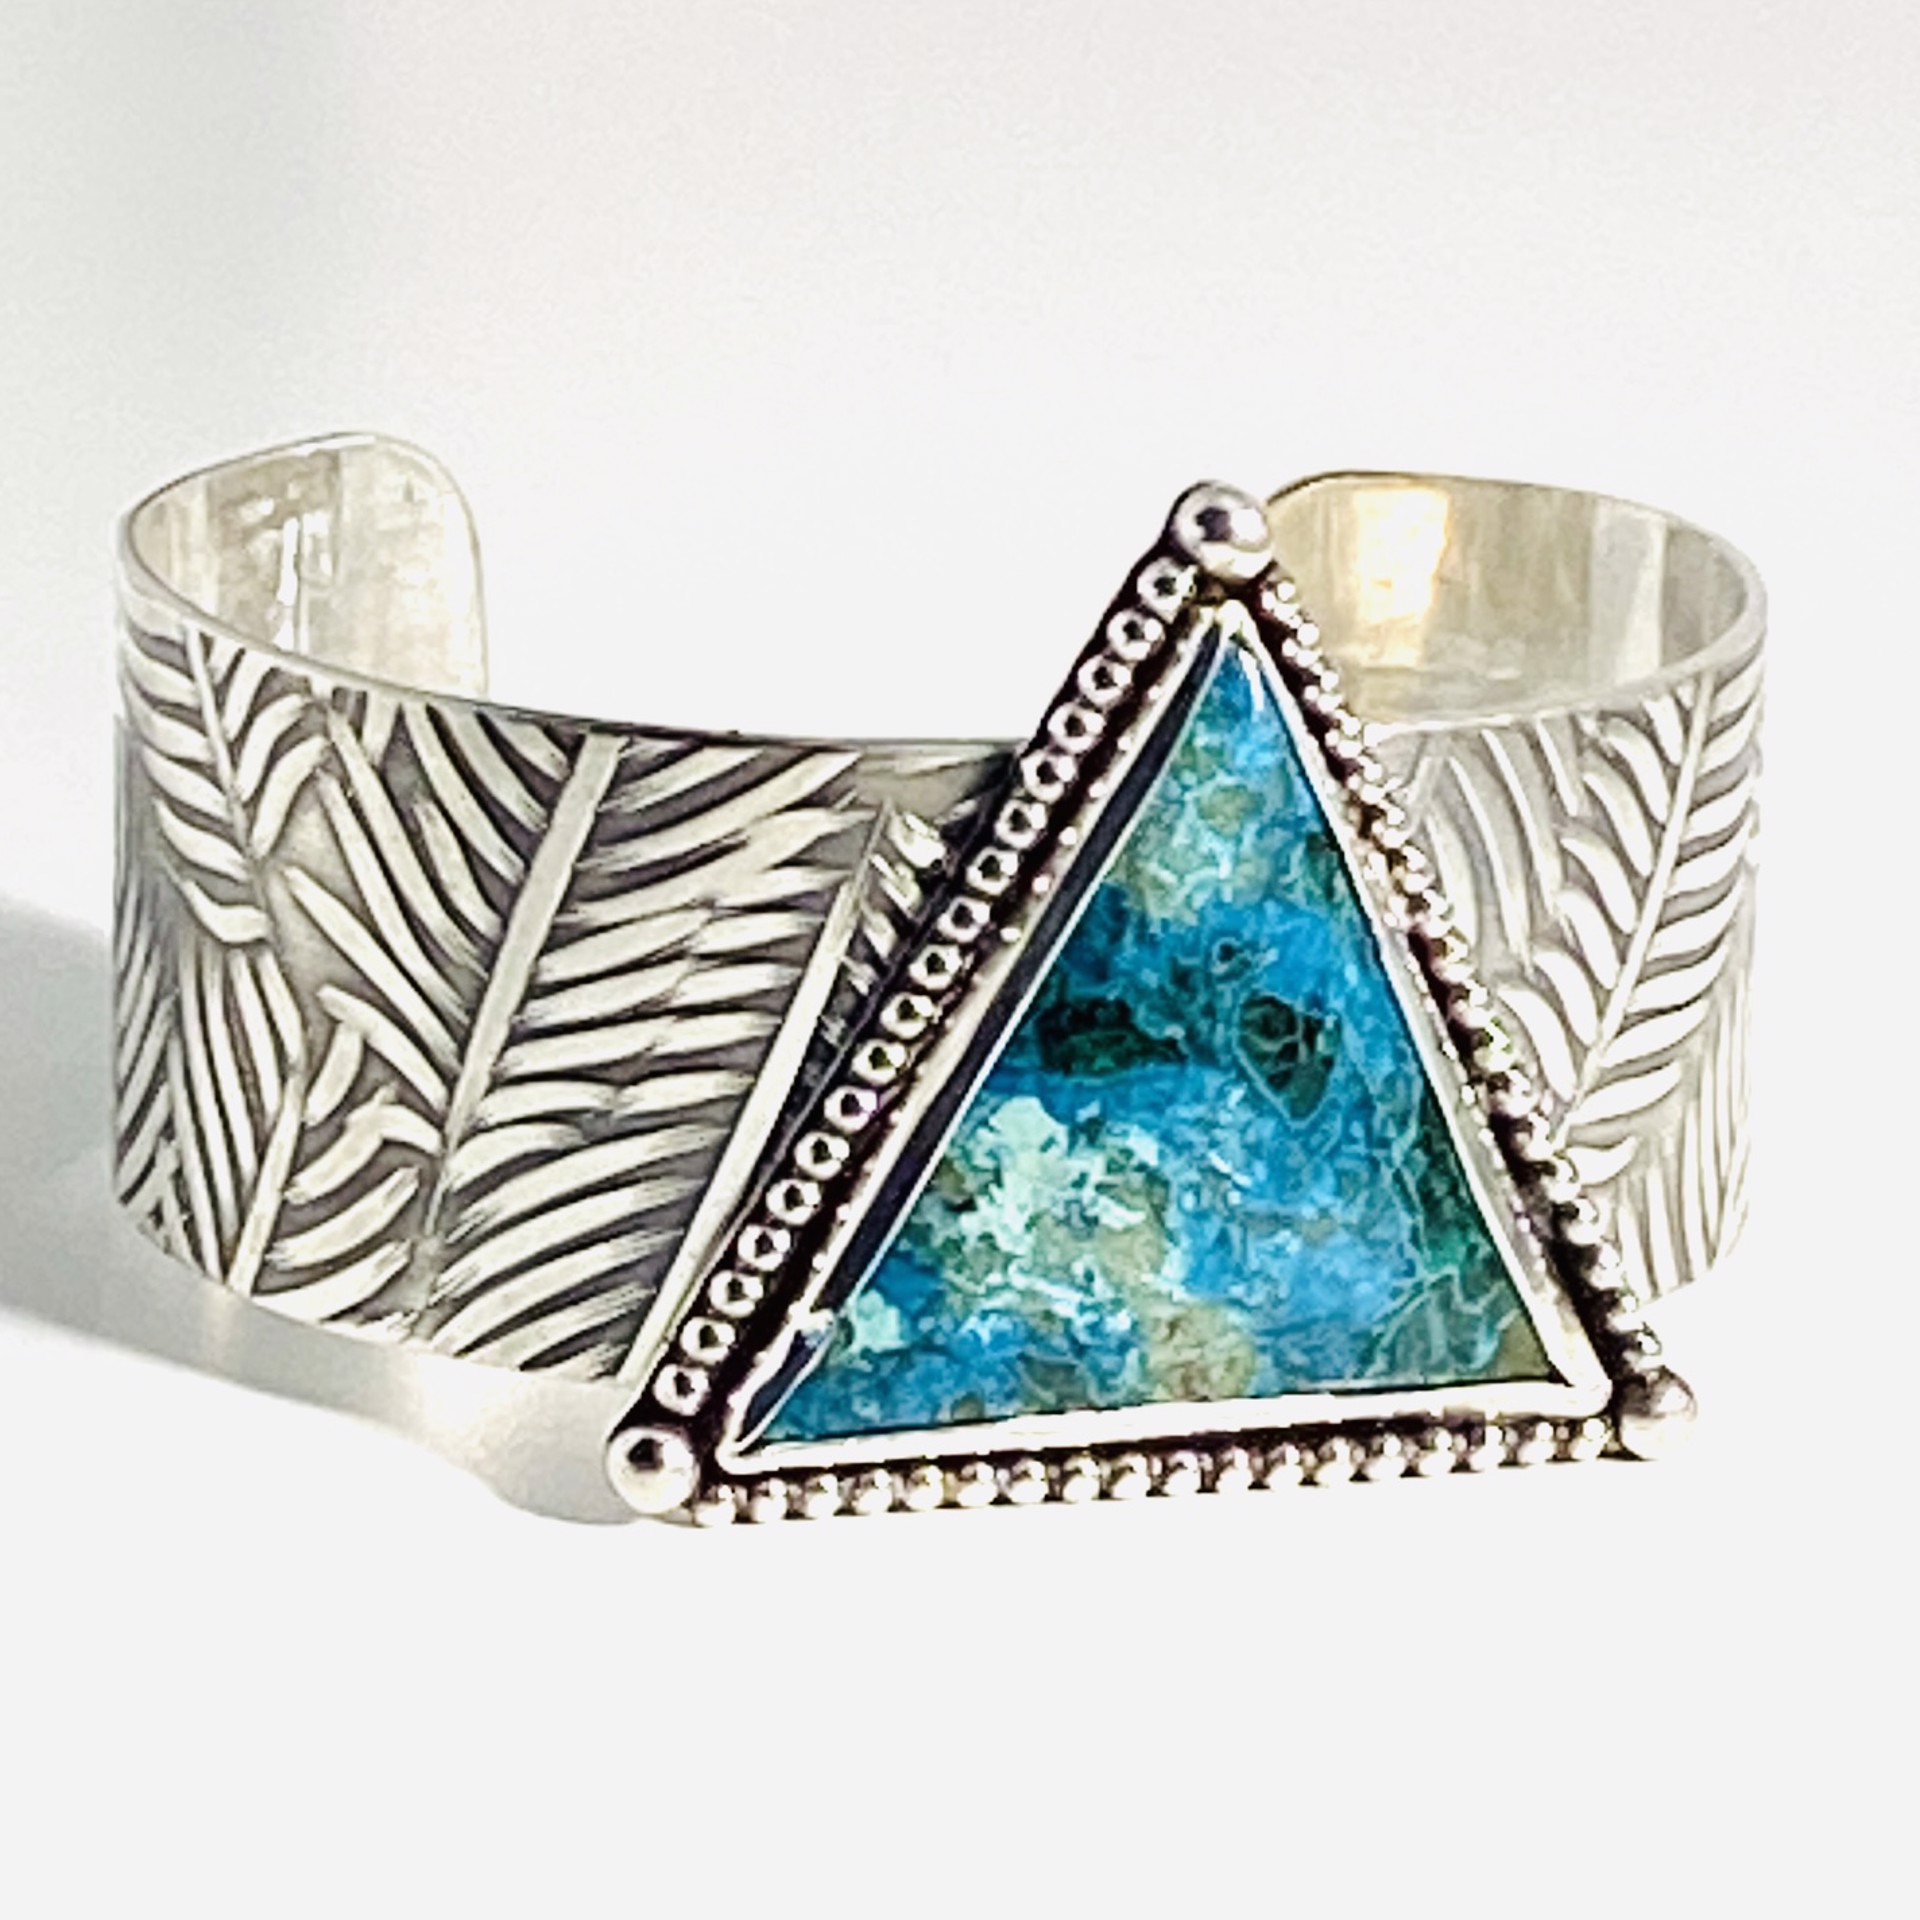 AB23-32  Sterling Leaf Design Large Triangle Shattuckite with bead bezel Cuff Bracelet by Anne Bivens